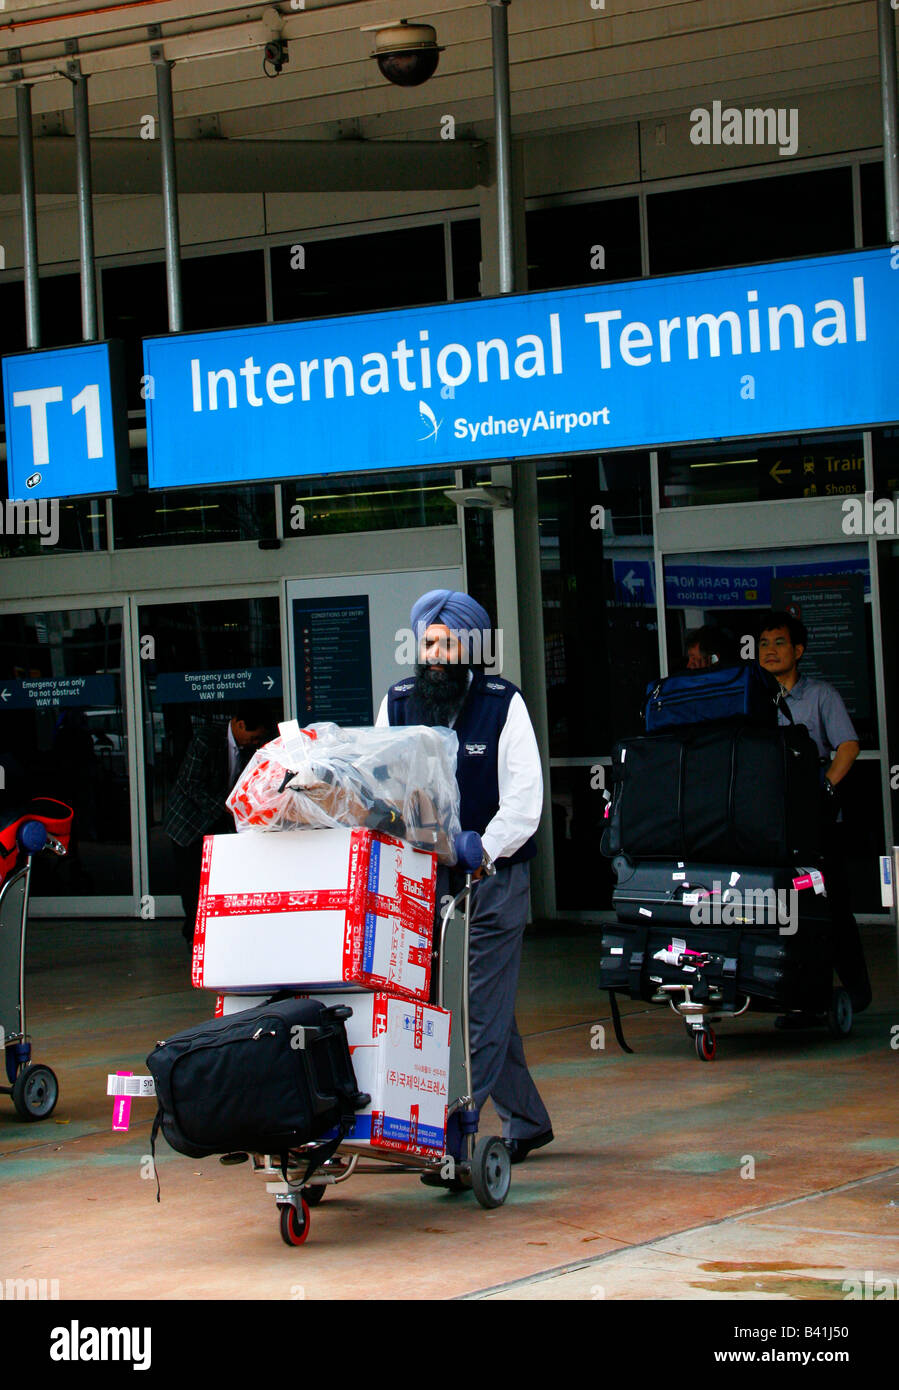 A Sihk Indian Taxi driver wheels a passengers luggage from the International Terminal at Sydney s Mascot airport Stock Photo